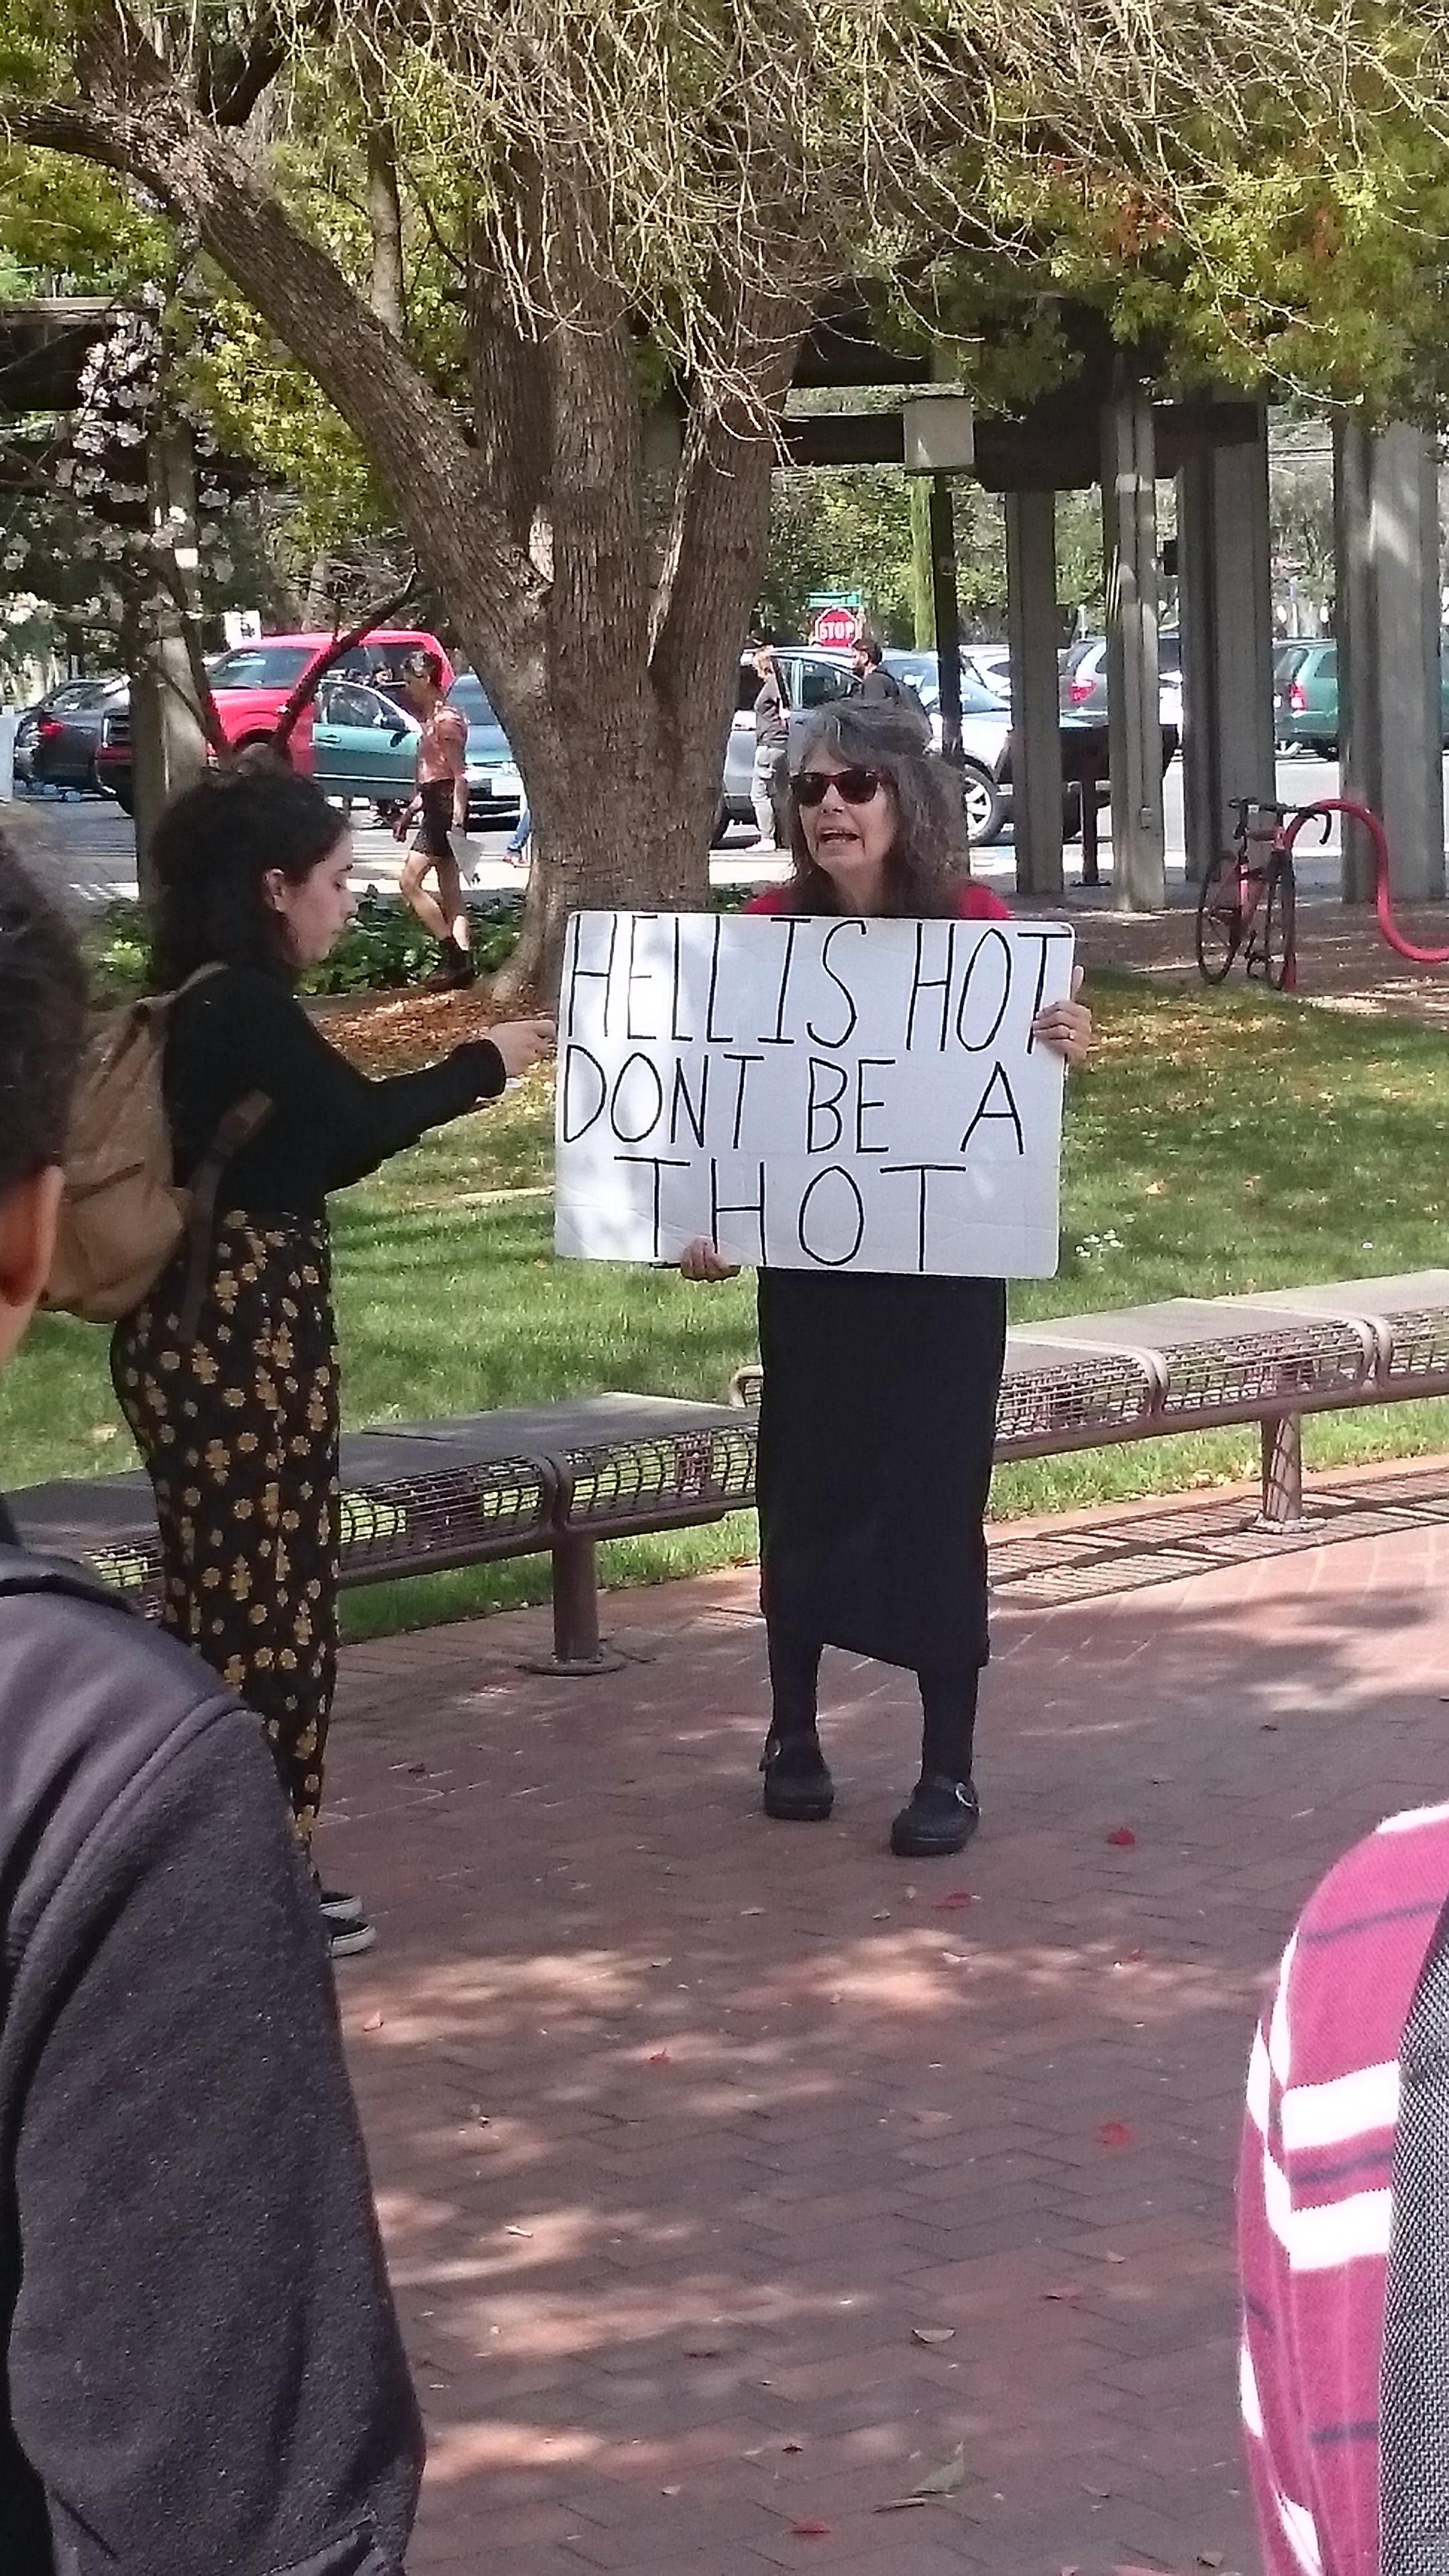 This woman at my college